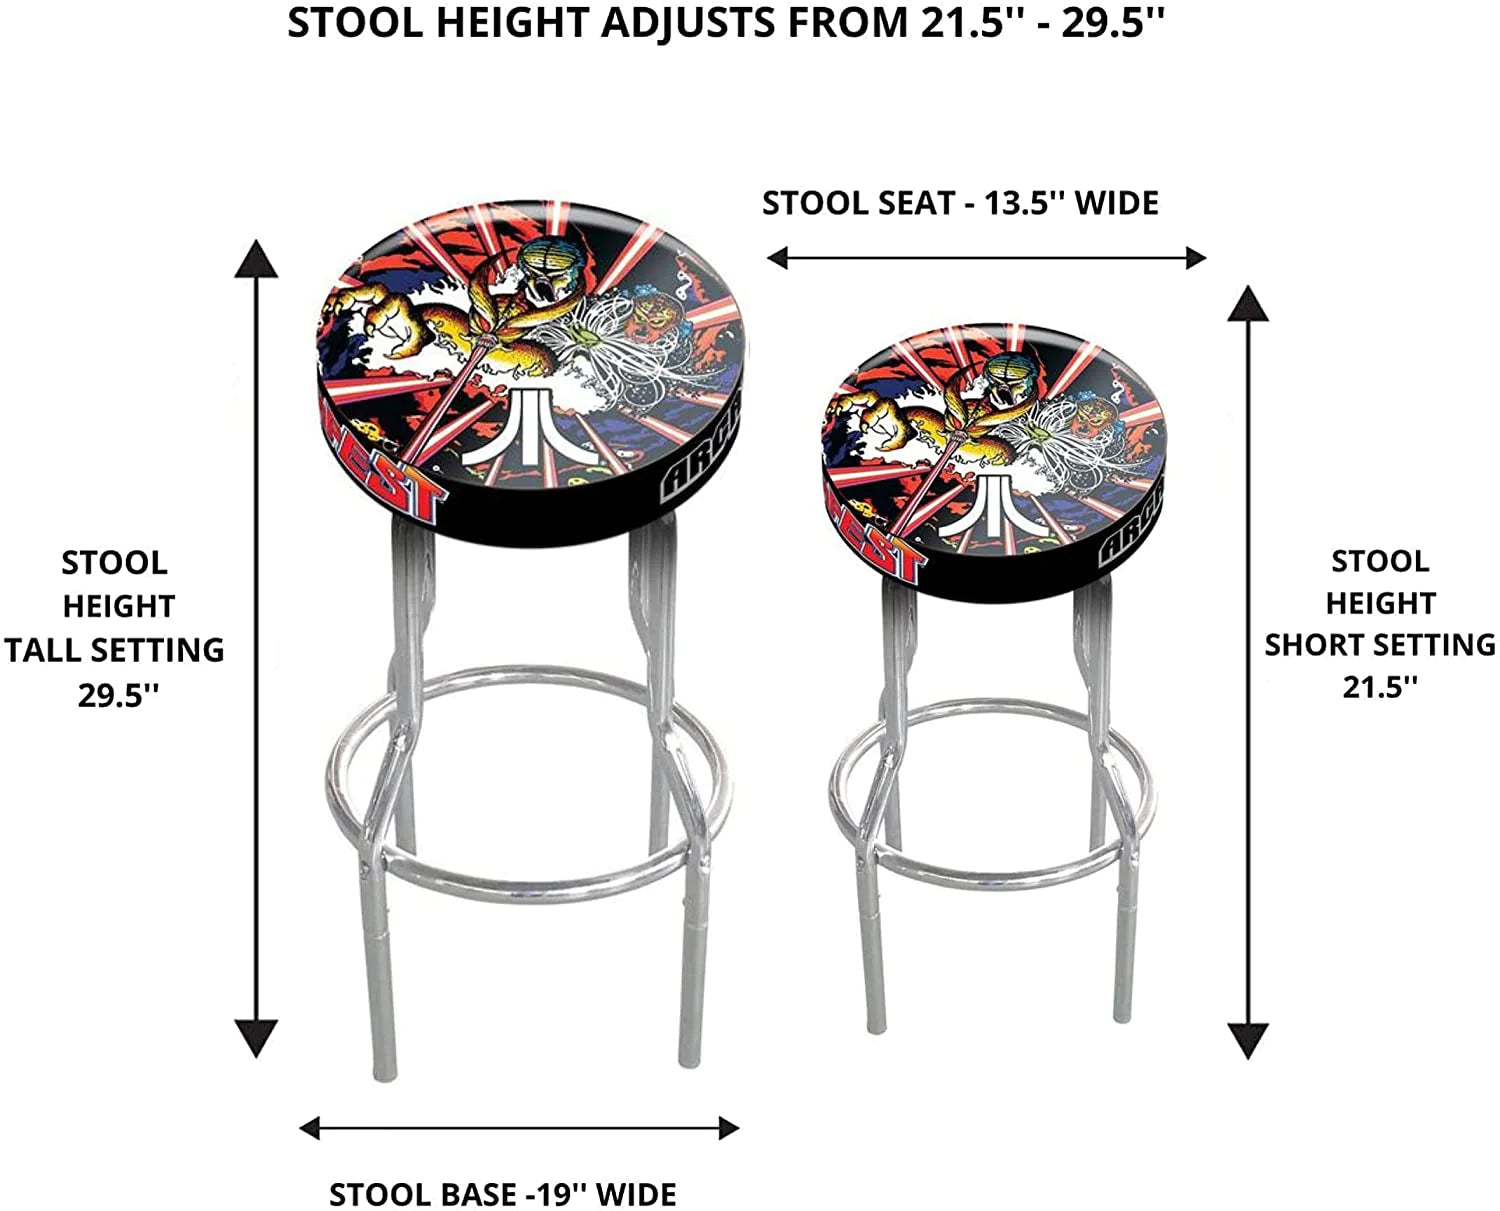 Bar Stool: Adjustable Height 21.5 inches to 29.5 inches